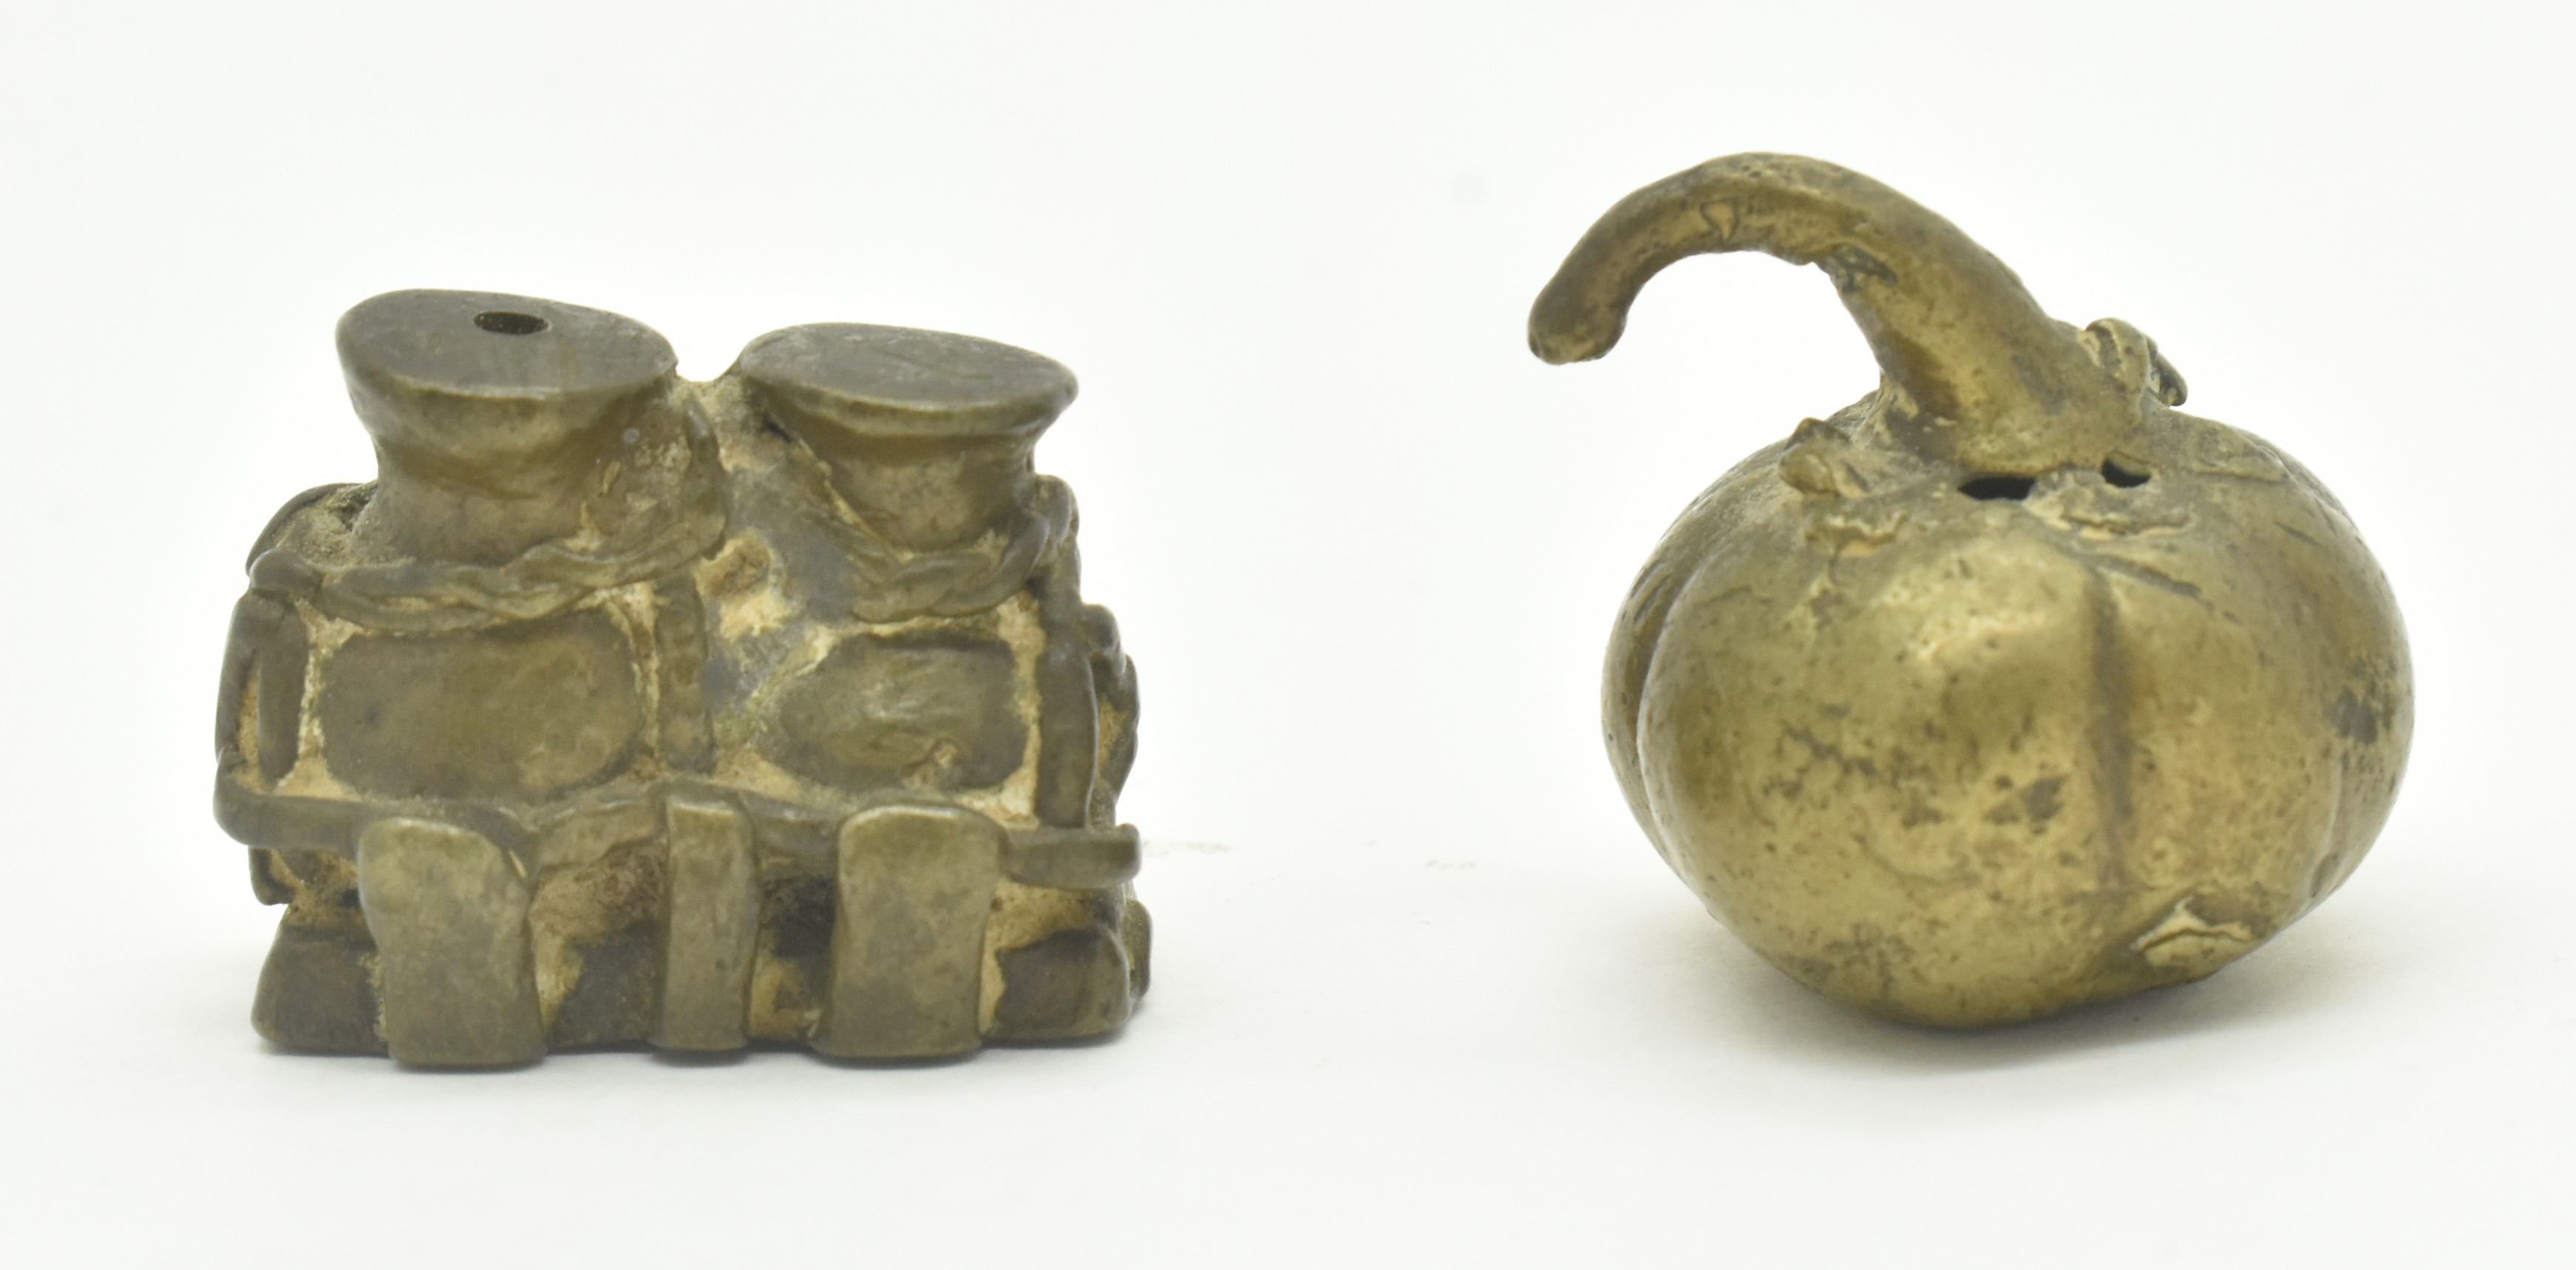 COLLECTION OF FIVE AFRICAN GHANA ASHANTI AKAN GOLD WEIGHTS - Image 6 of 8